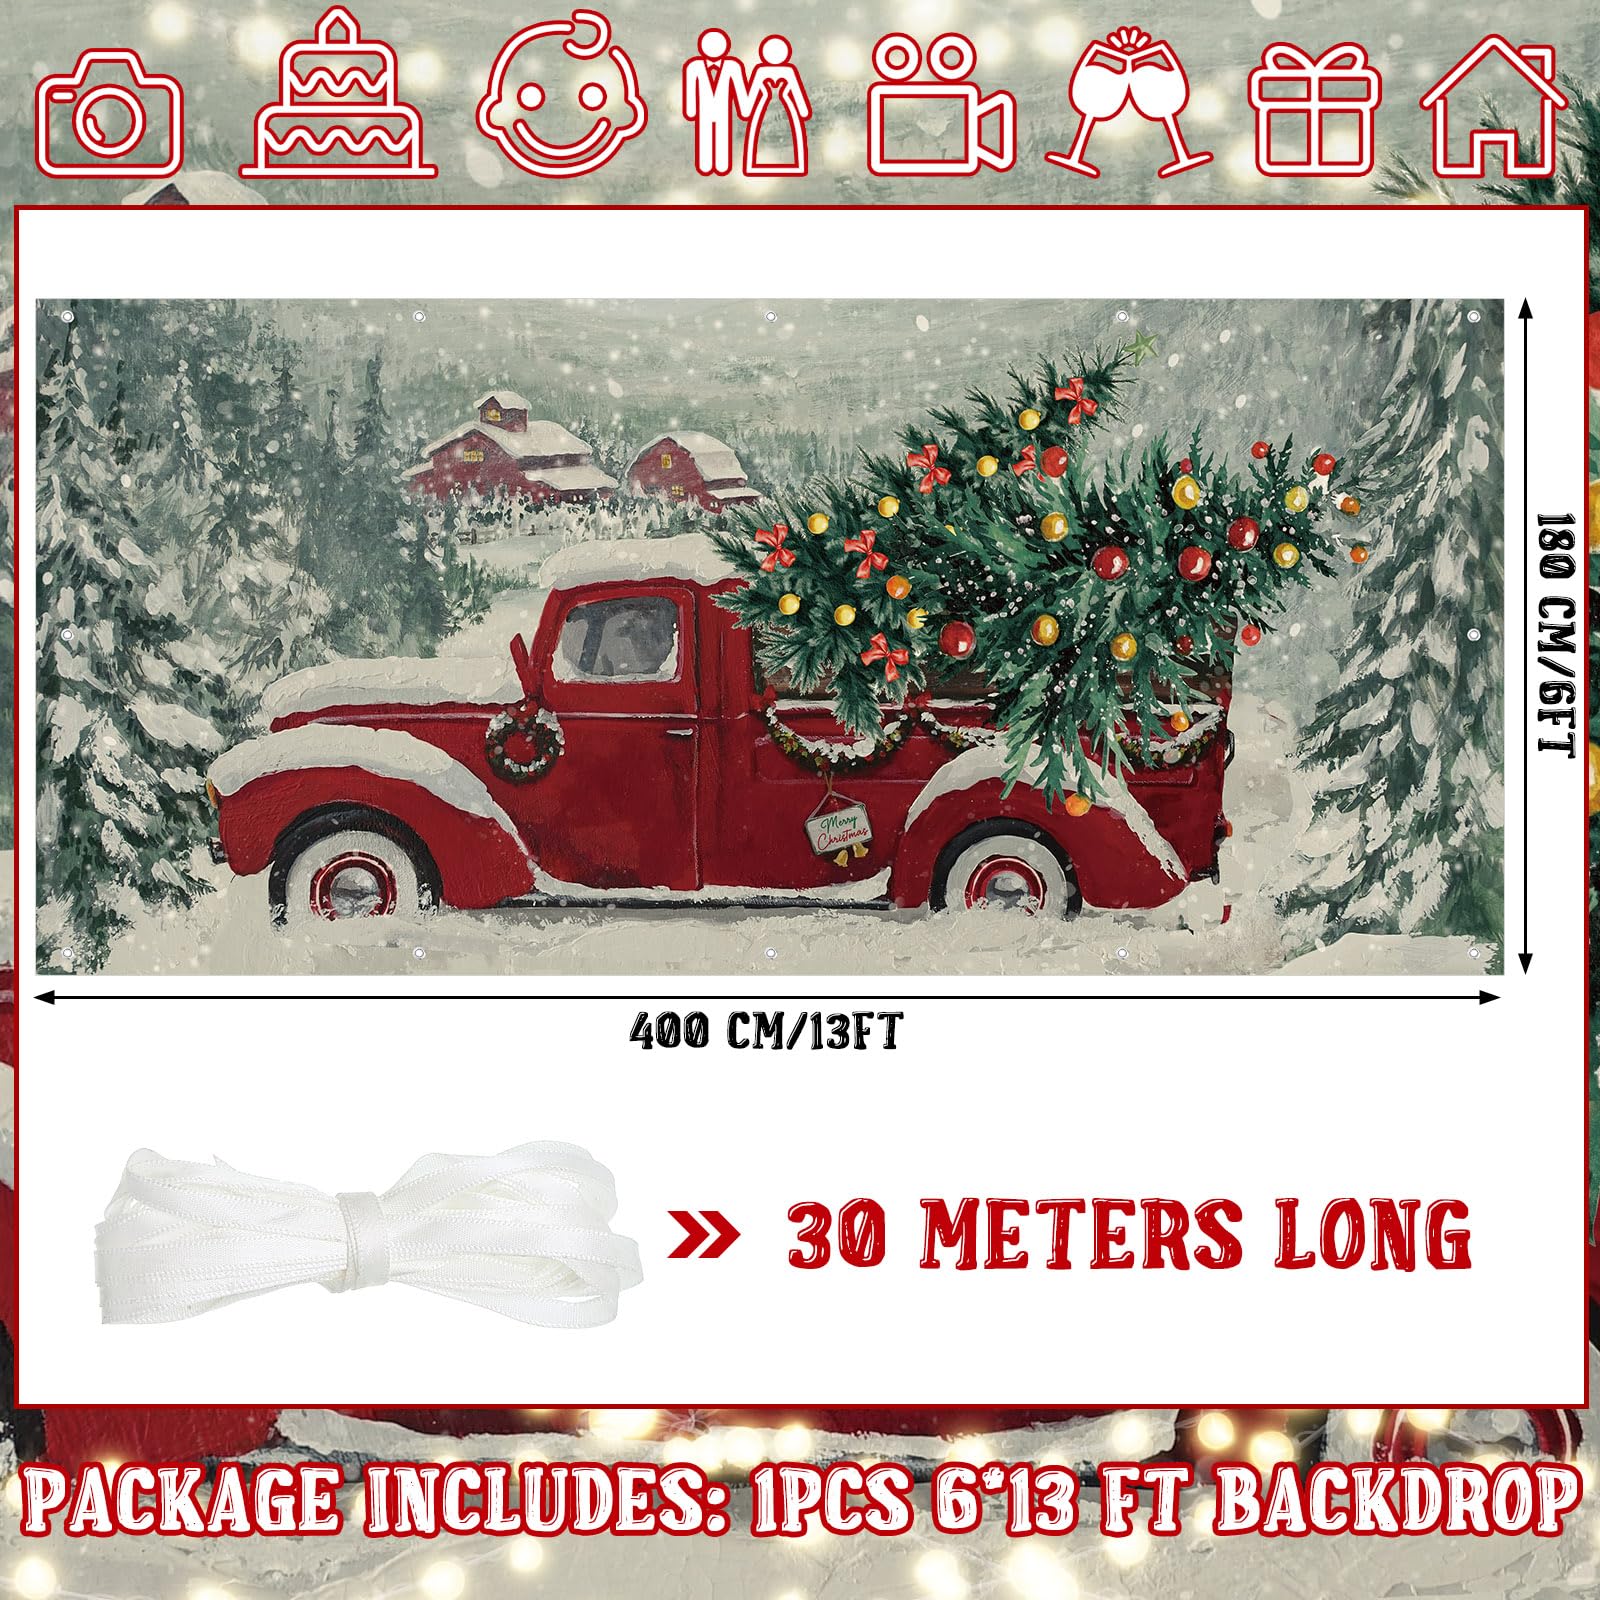 Ganeen 6x13 ft Christmas Outdoor Red Truck Garage Door Banner Large Winter Forest Pine Trees Snowy Backdrop Holiday Background Sign for Xmas Garage Door Wall Decoration Props Gifts